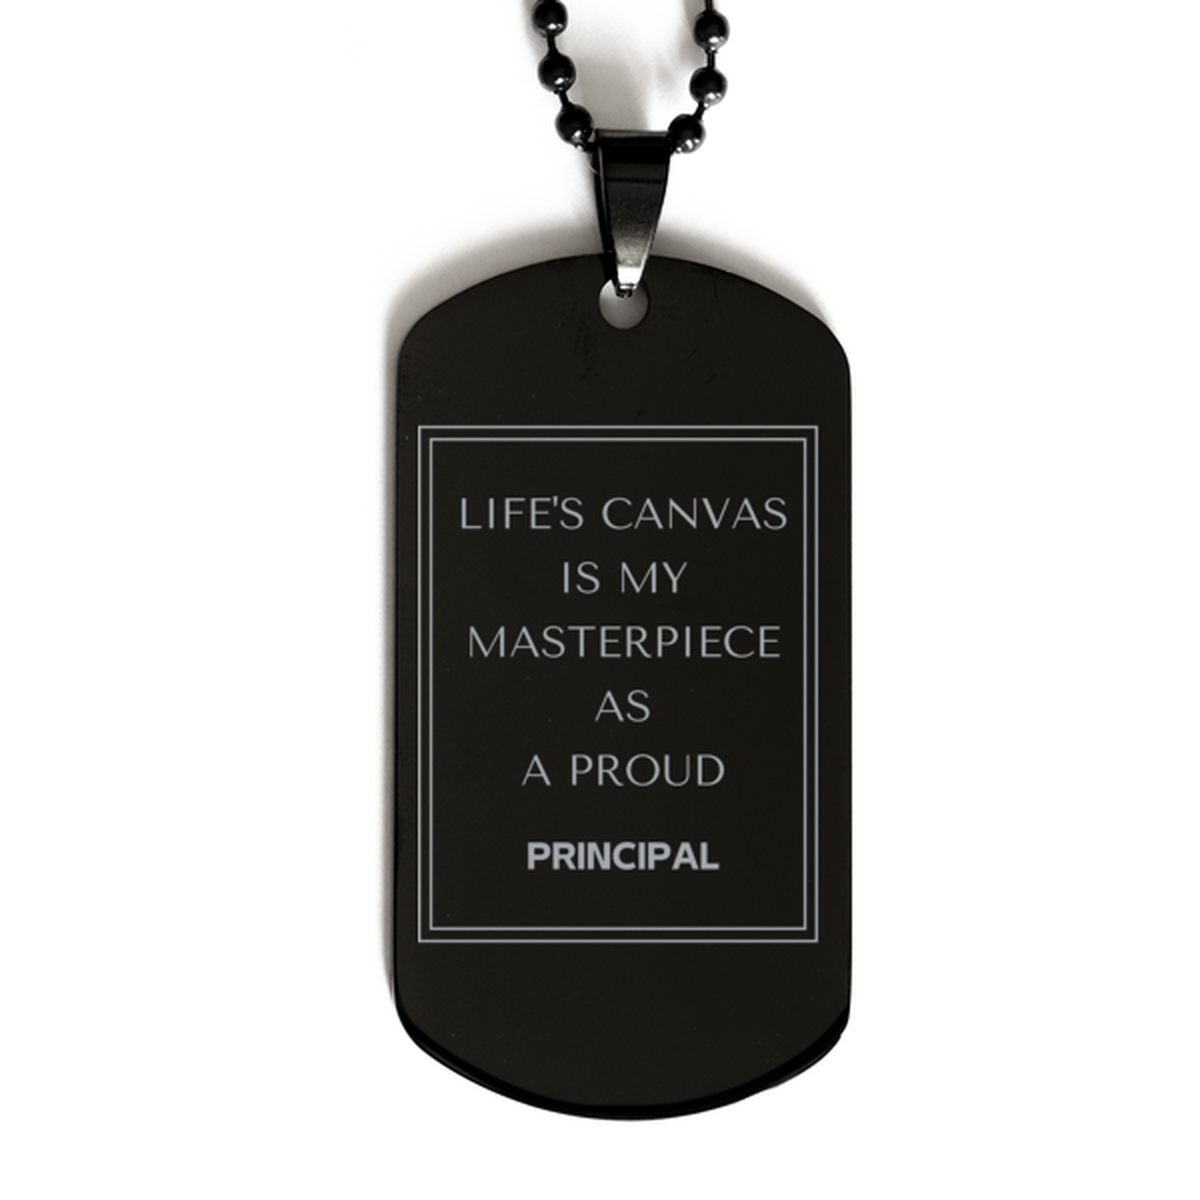 Proud Principal Gifts, Life's canvas is my masterpiece, Epic Birthday Christmas Unique Black Dog Tag For Principal, Coworkers, Men, Women, Friends